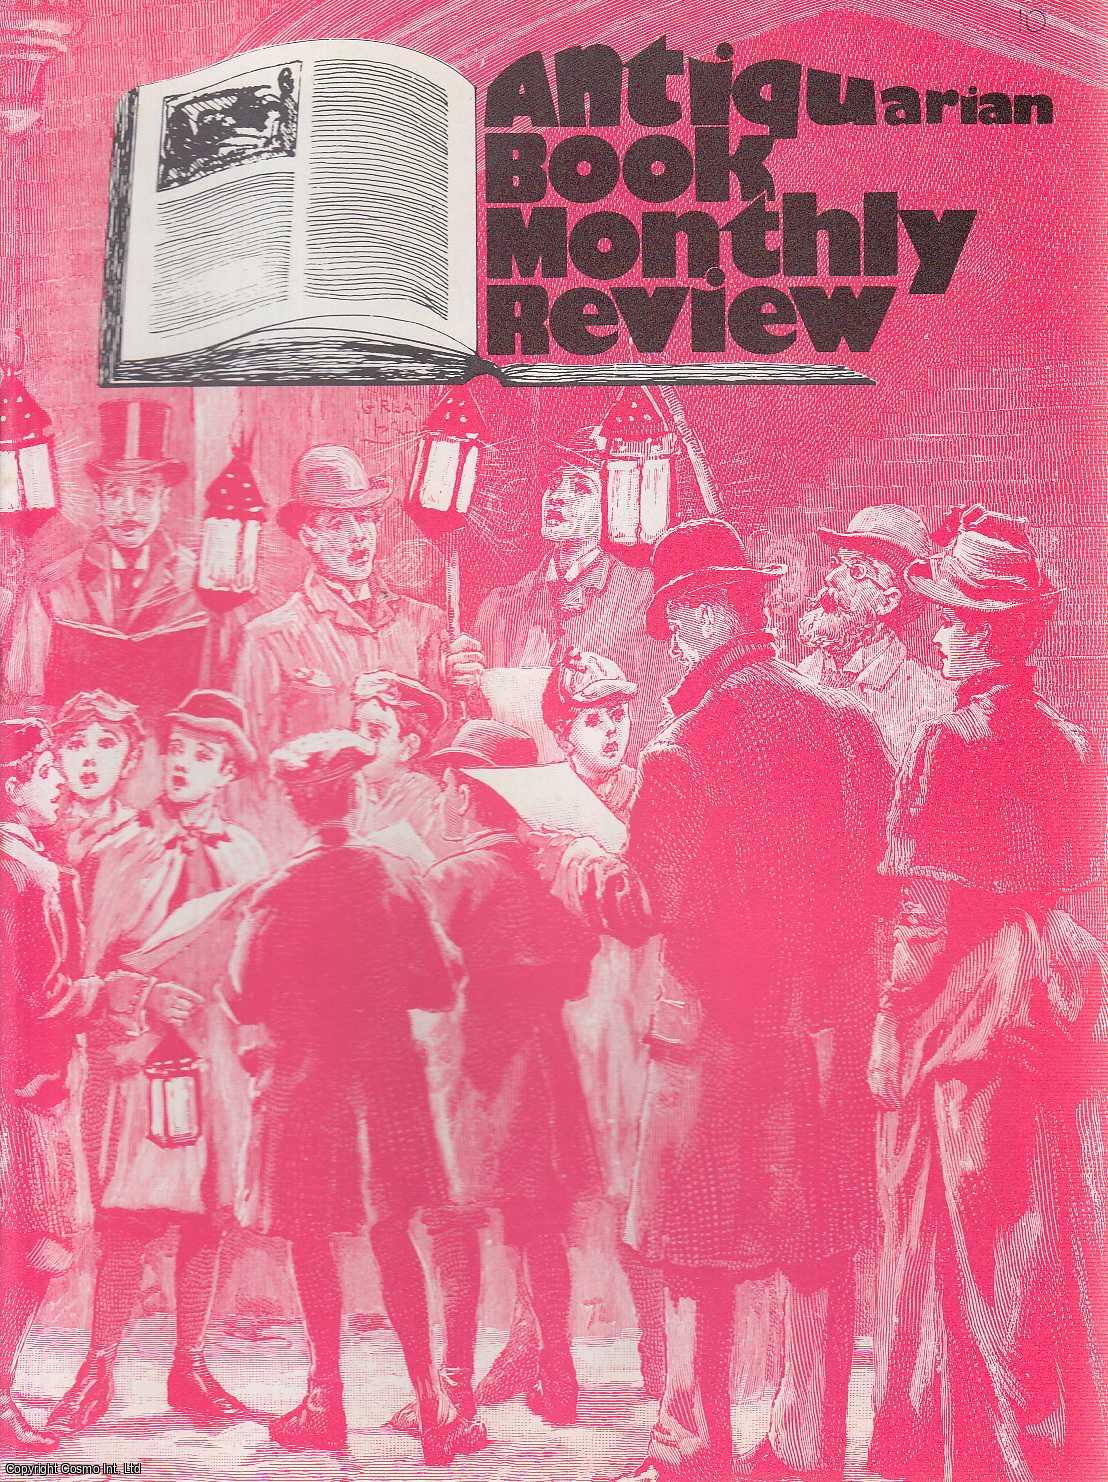 ABMR - Antiquarian Book Monthly Review. Issue No. 10 for November 1974. An original complete monthly issue of the Antiquarian Book Monthly Review, 1974.